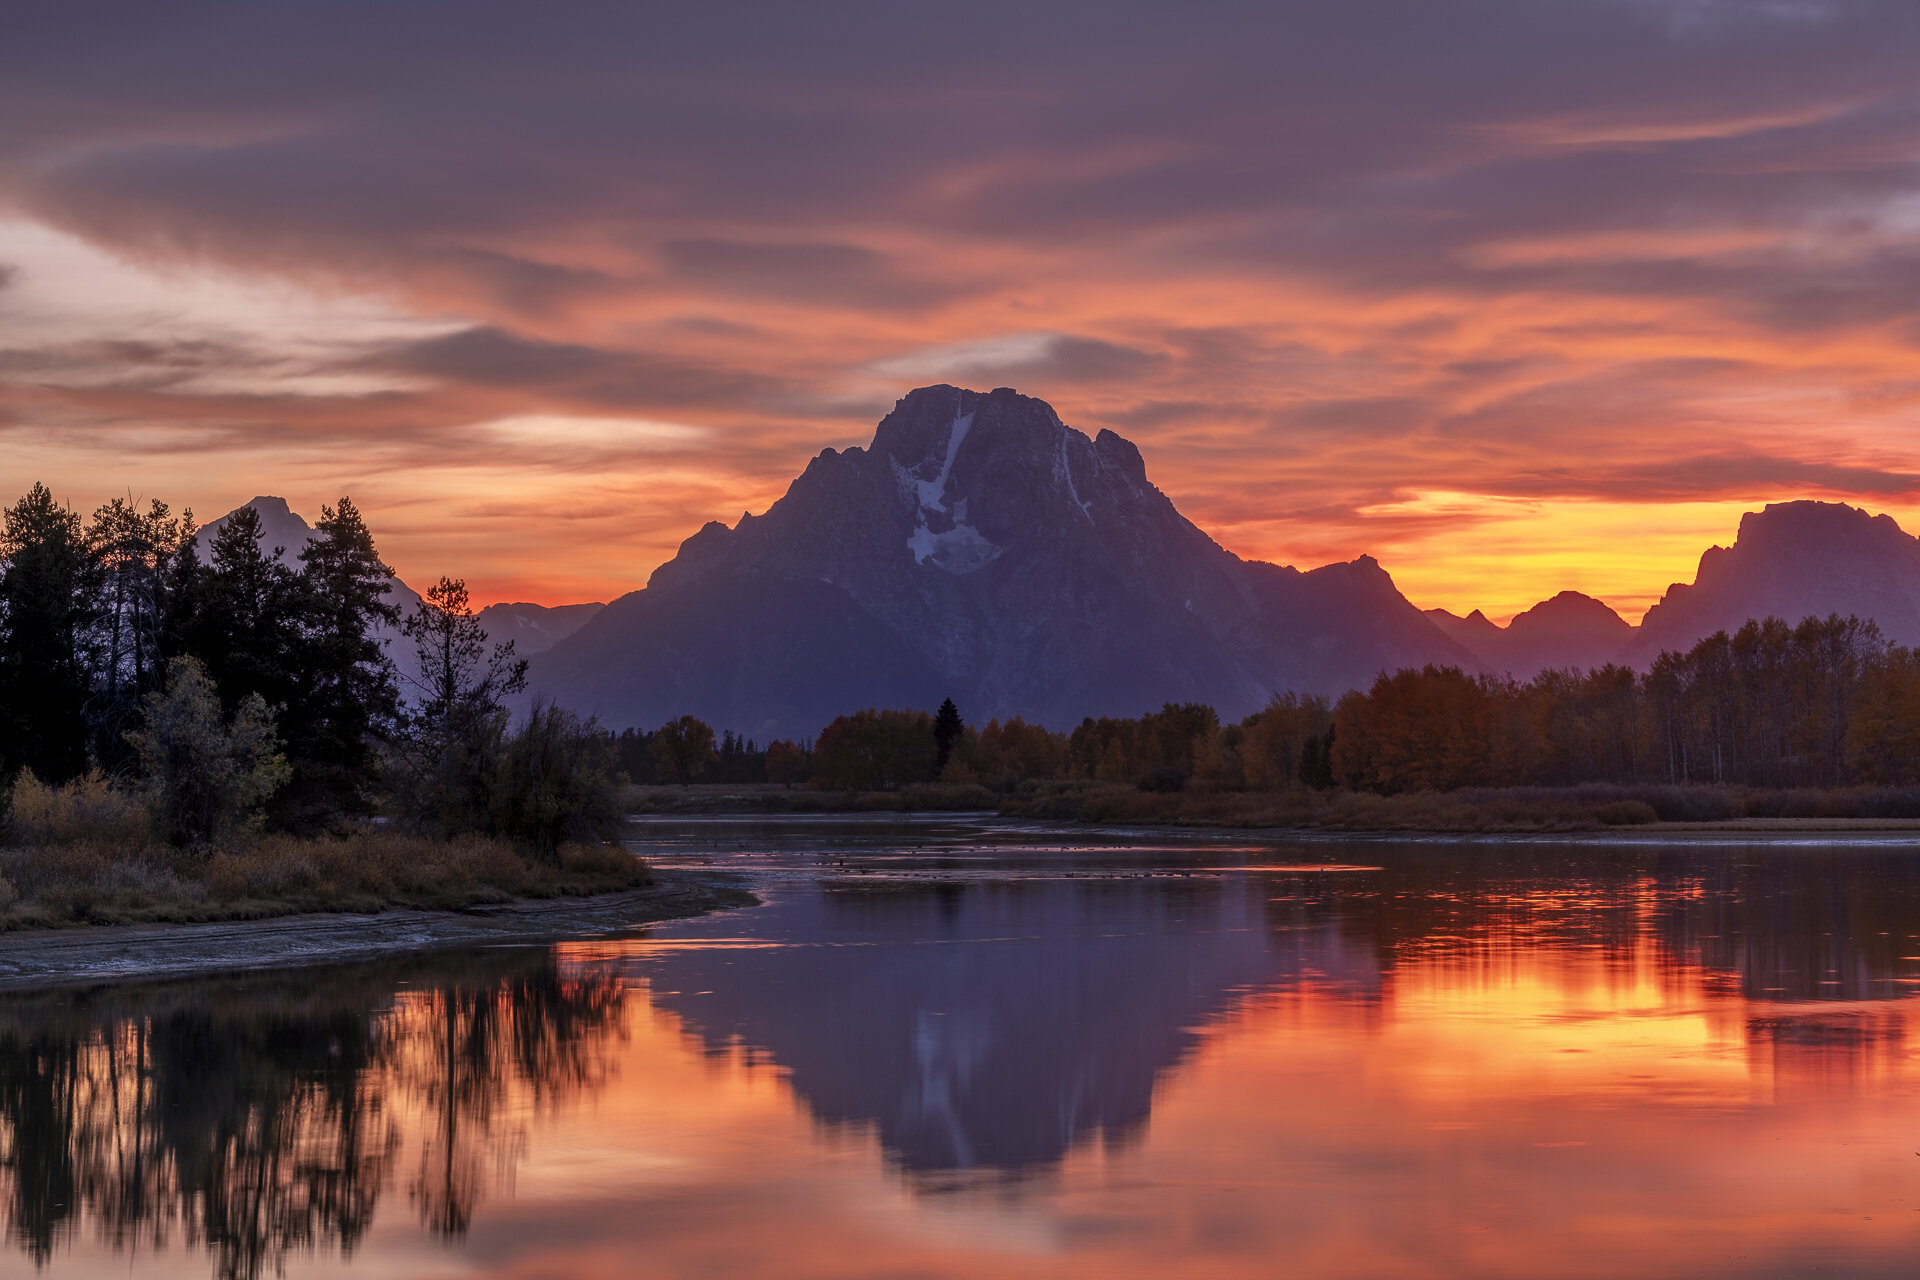 Mt. Moran from Oxbow Bend at sunset